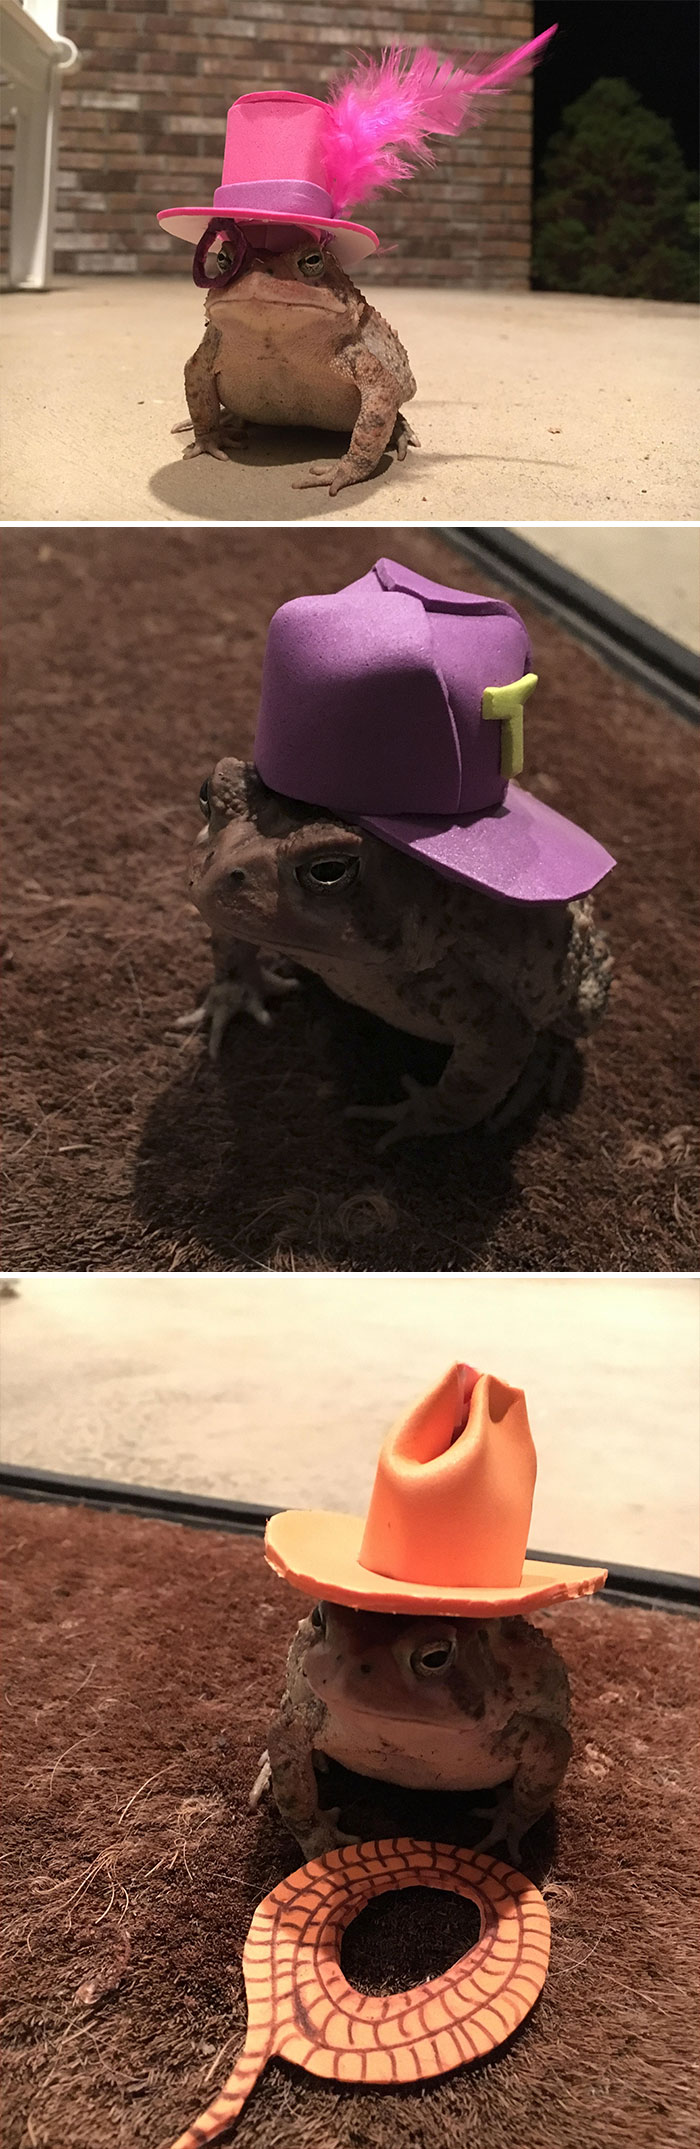 The Toad That Hangs Out On My Porch Needed A Hat